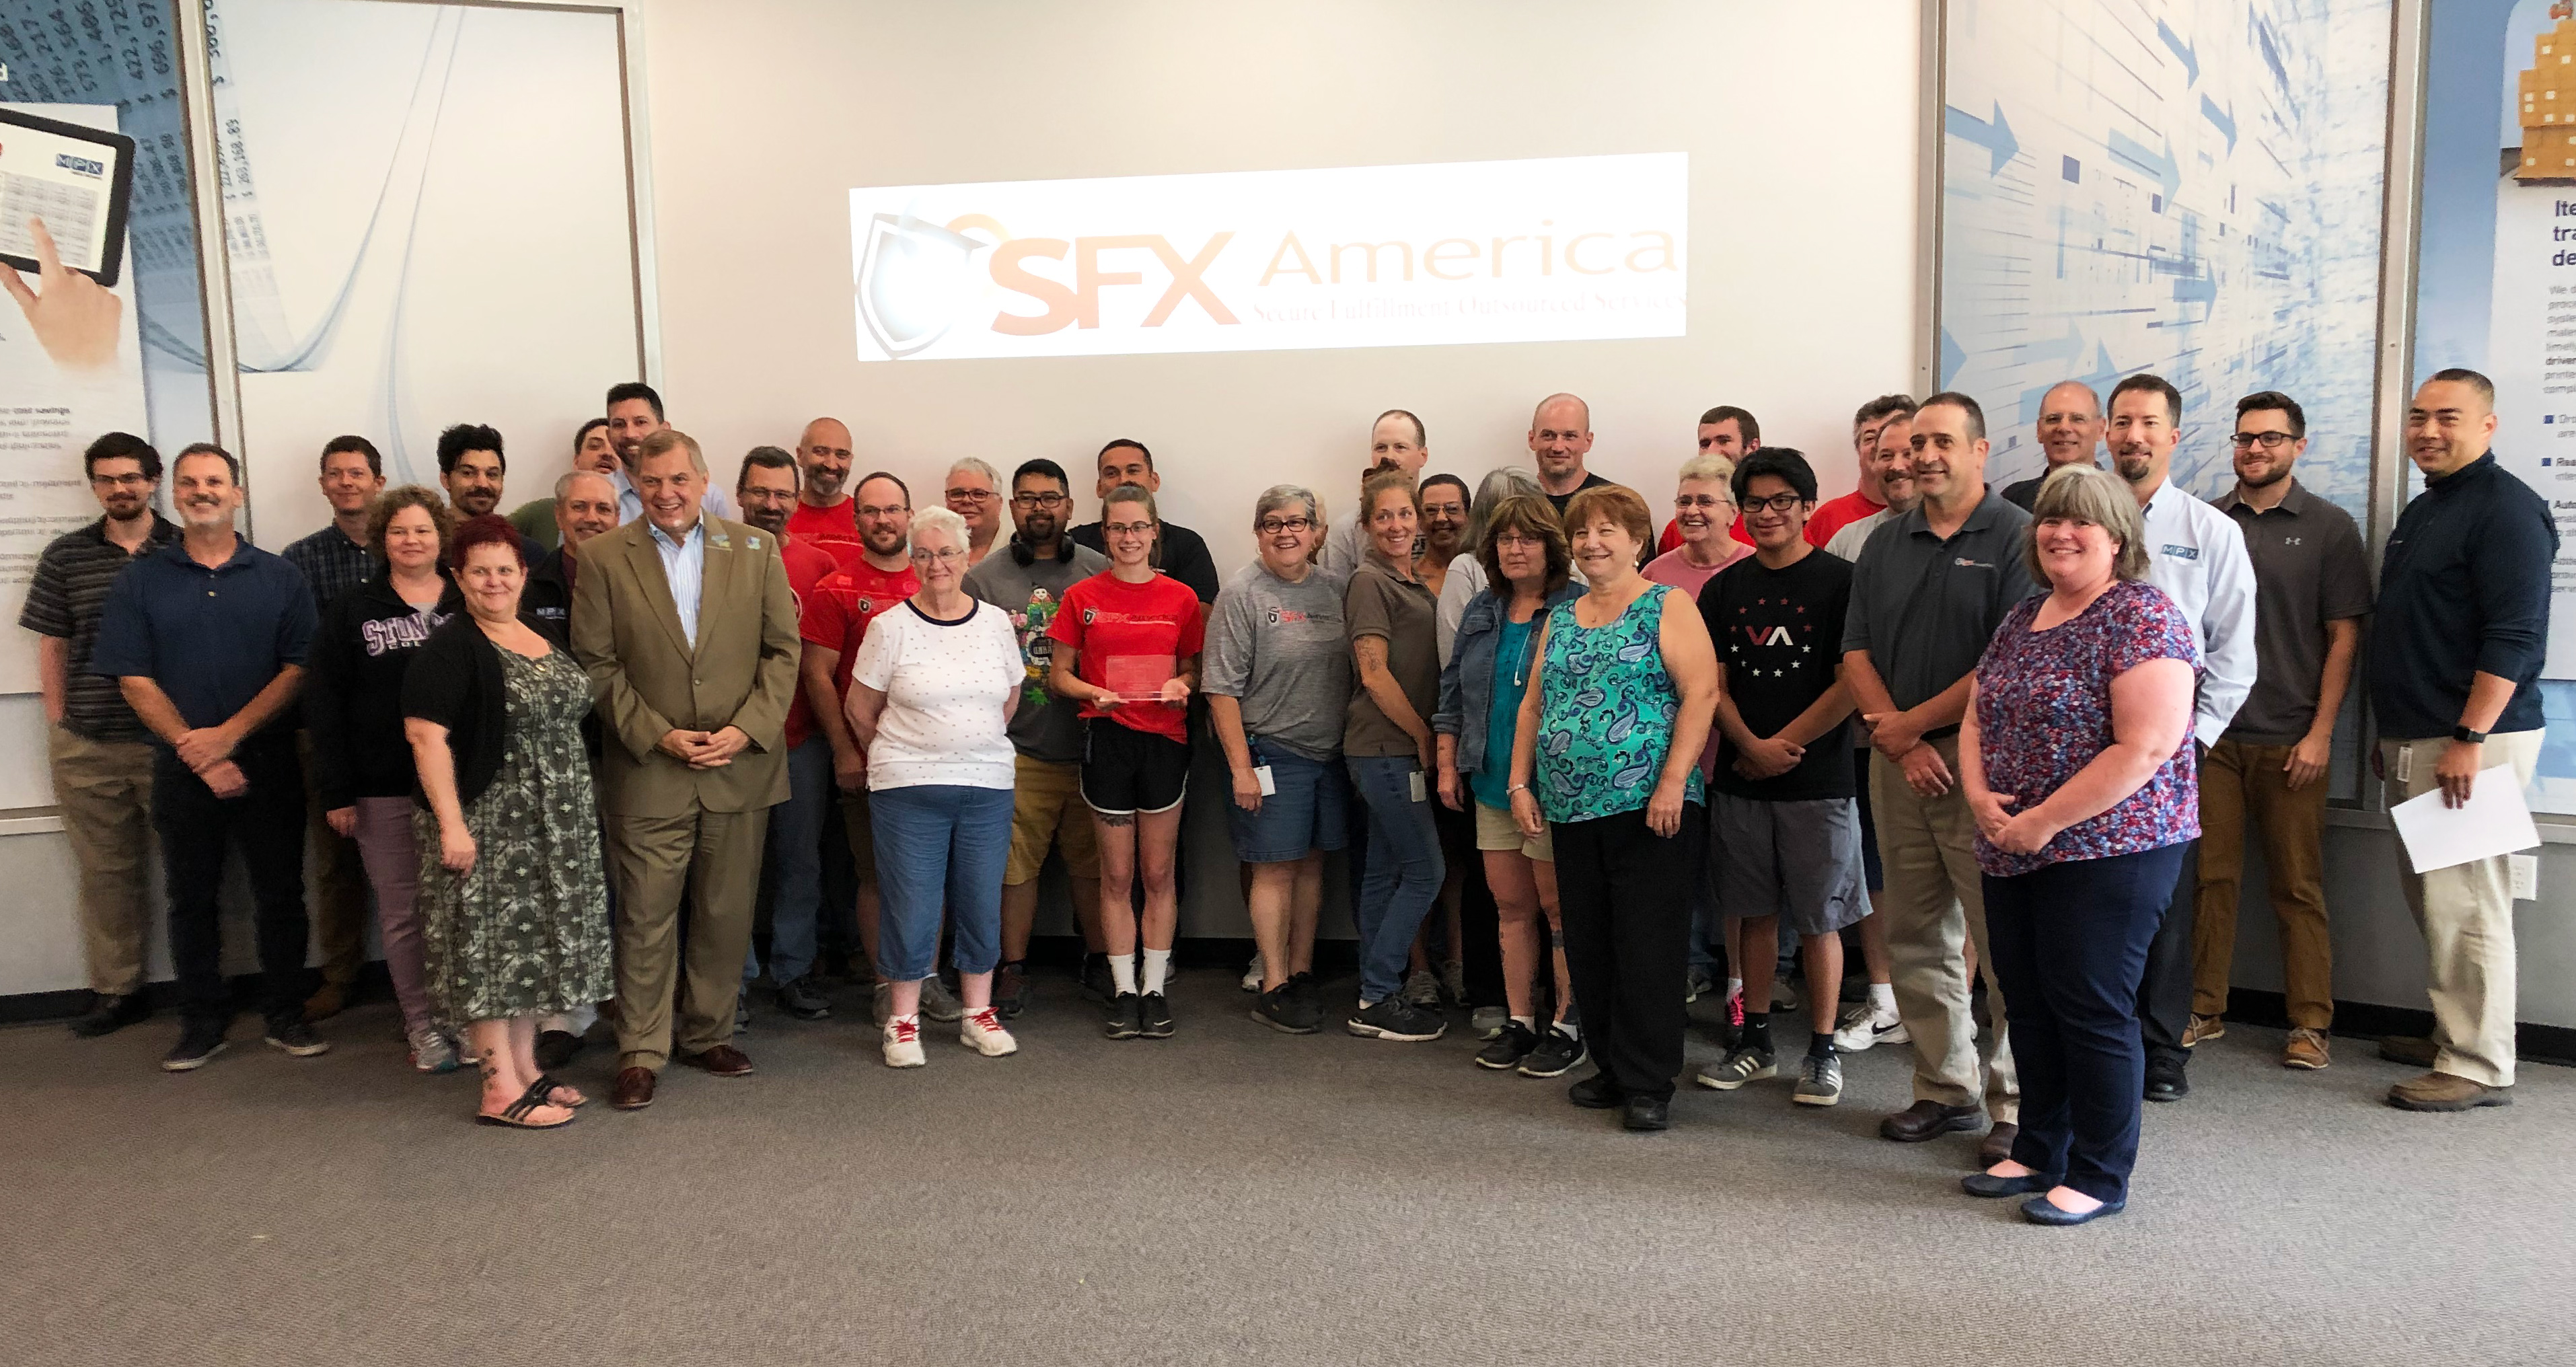 Peter Kowalczuk, President of Canon Solutions America, and the SFX team.